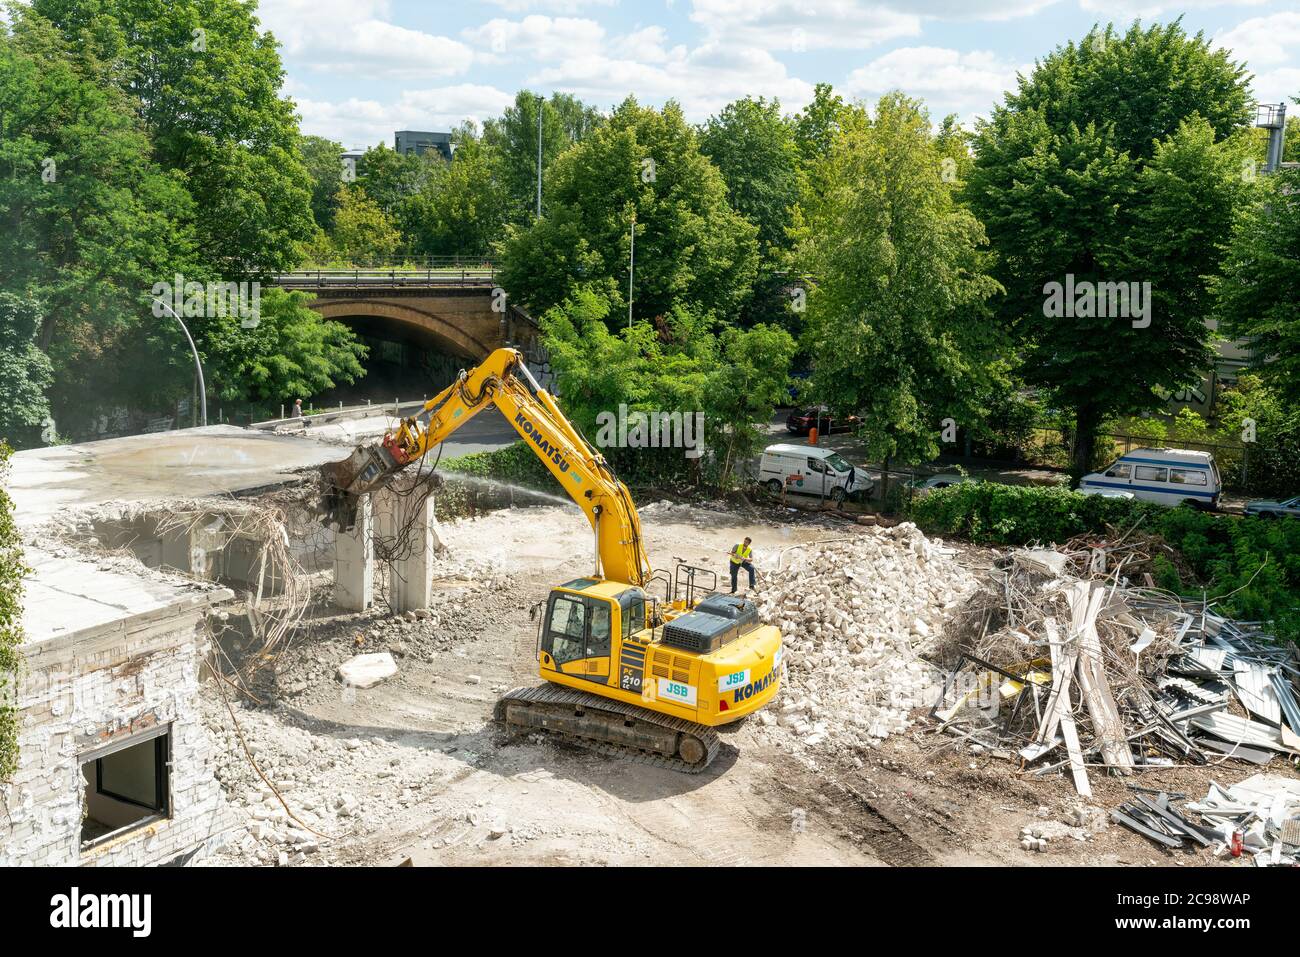 Berlin, Germany - july 13, 2020: A building site in Berlin with a yellow excavator demolishing a house Stock Photo